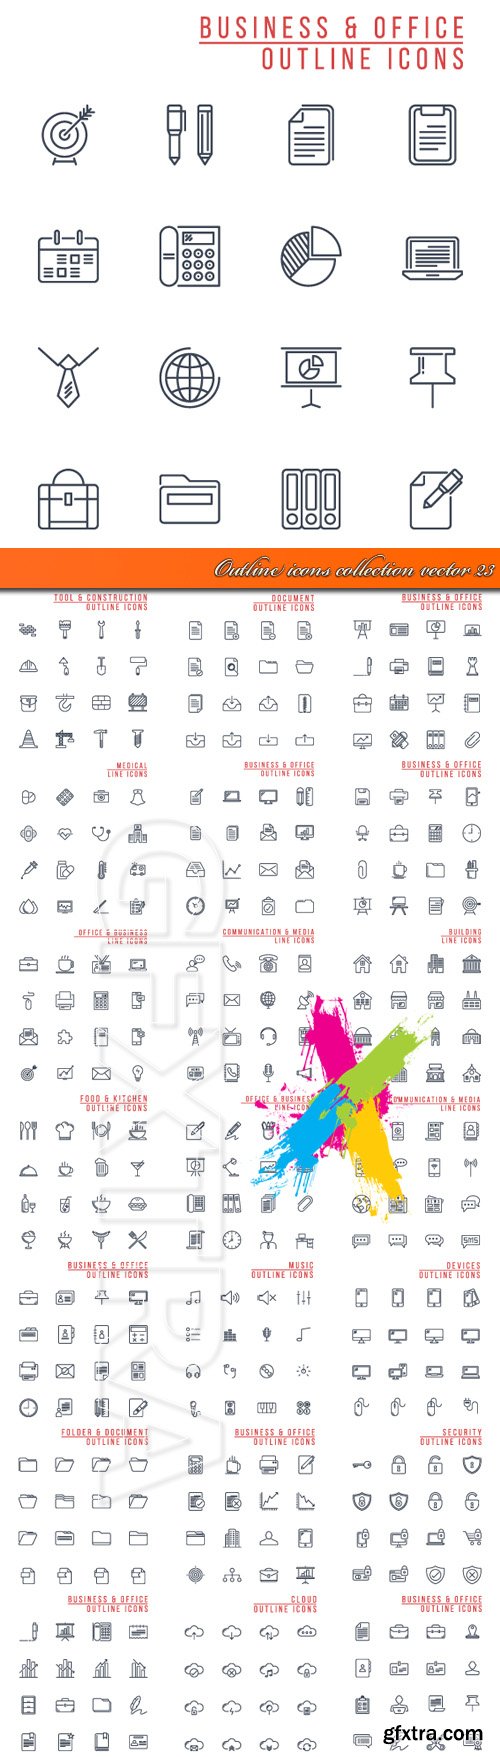 Outline icons collection vector 23